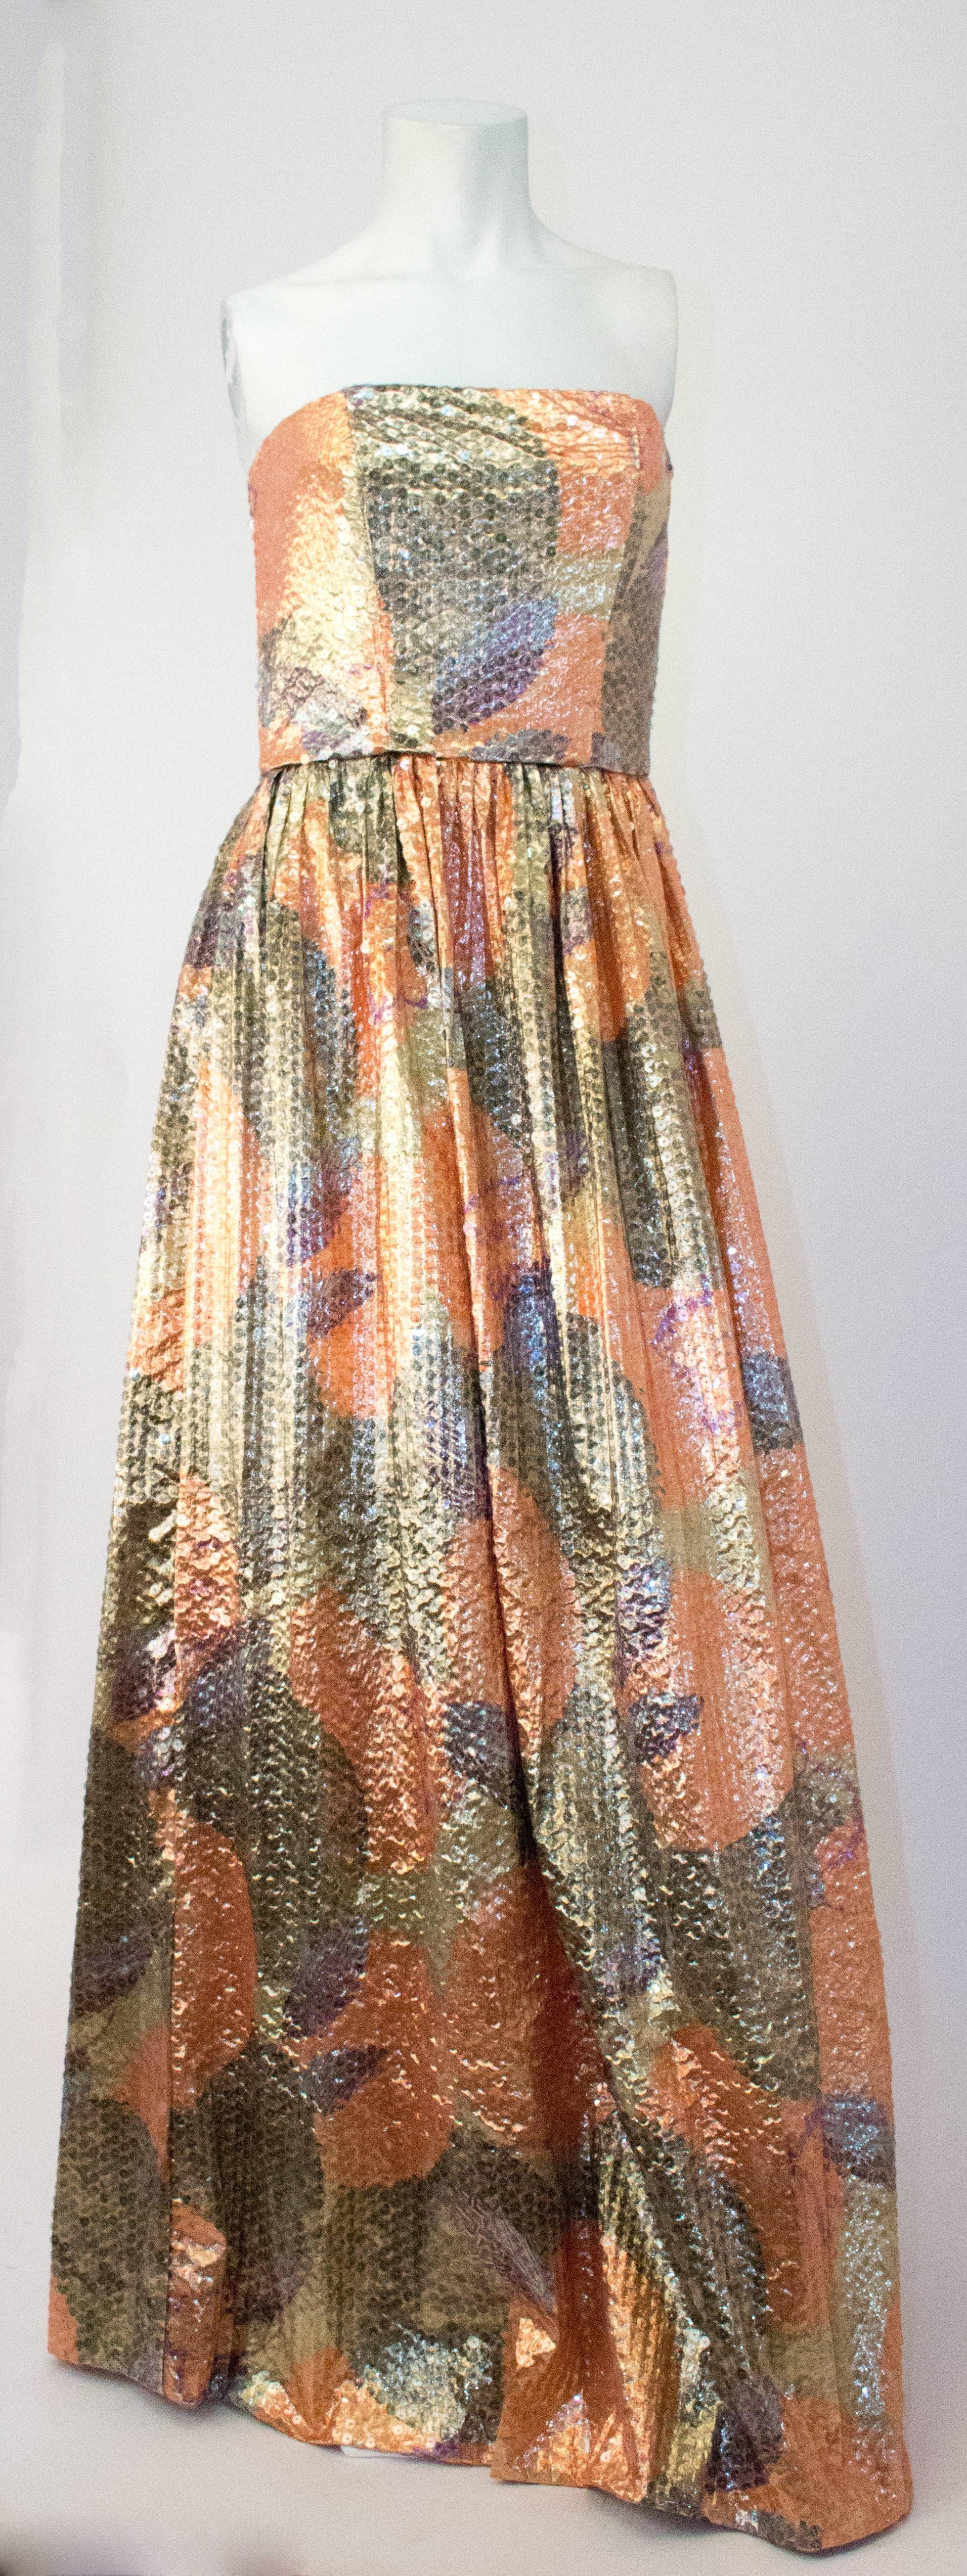 60s Peach & Silver Strapless Sequined Gown. Gathered skirt. Lined bodice. Boning in bodice. Unlined skirt. Zips up the side. 

